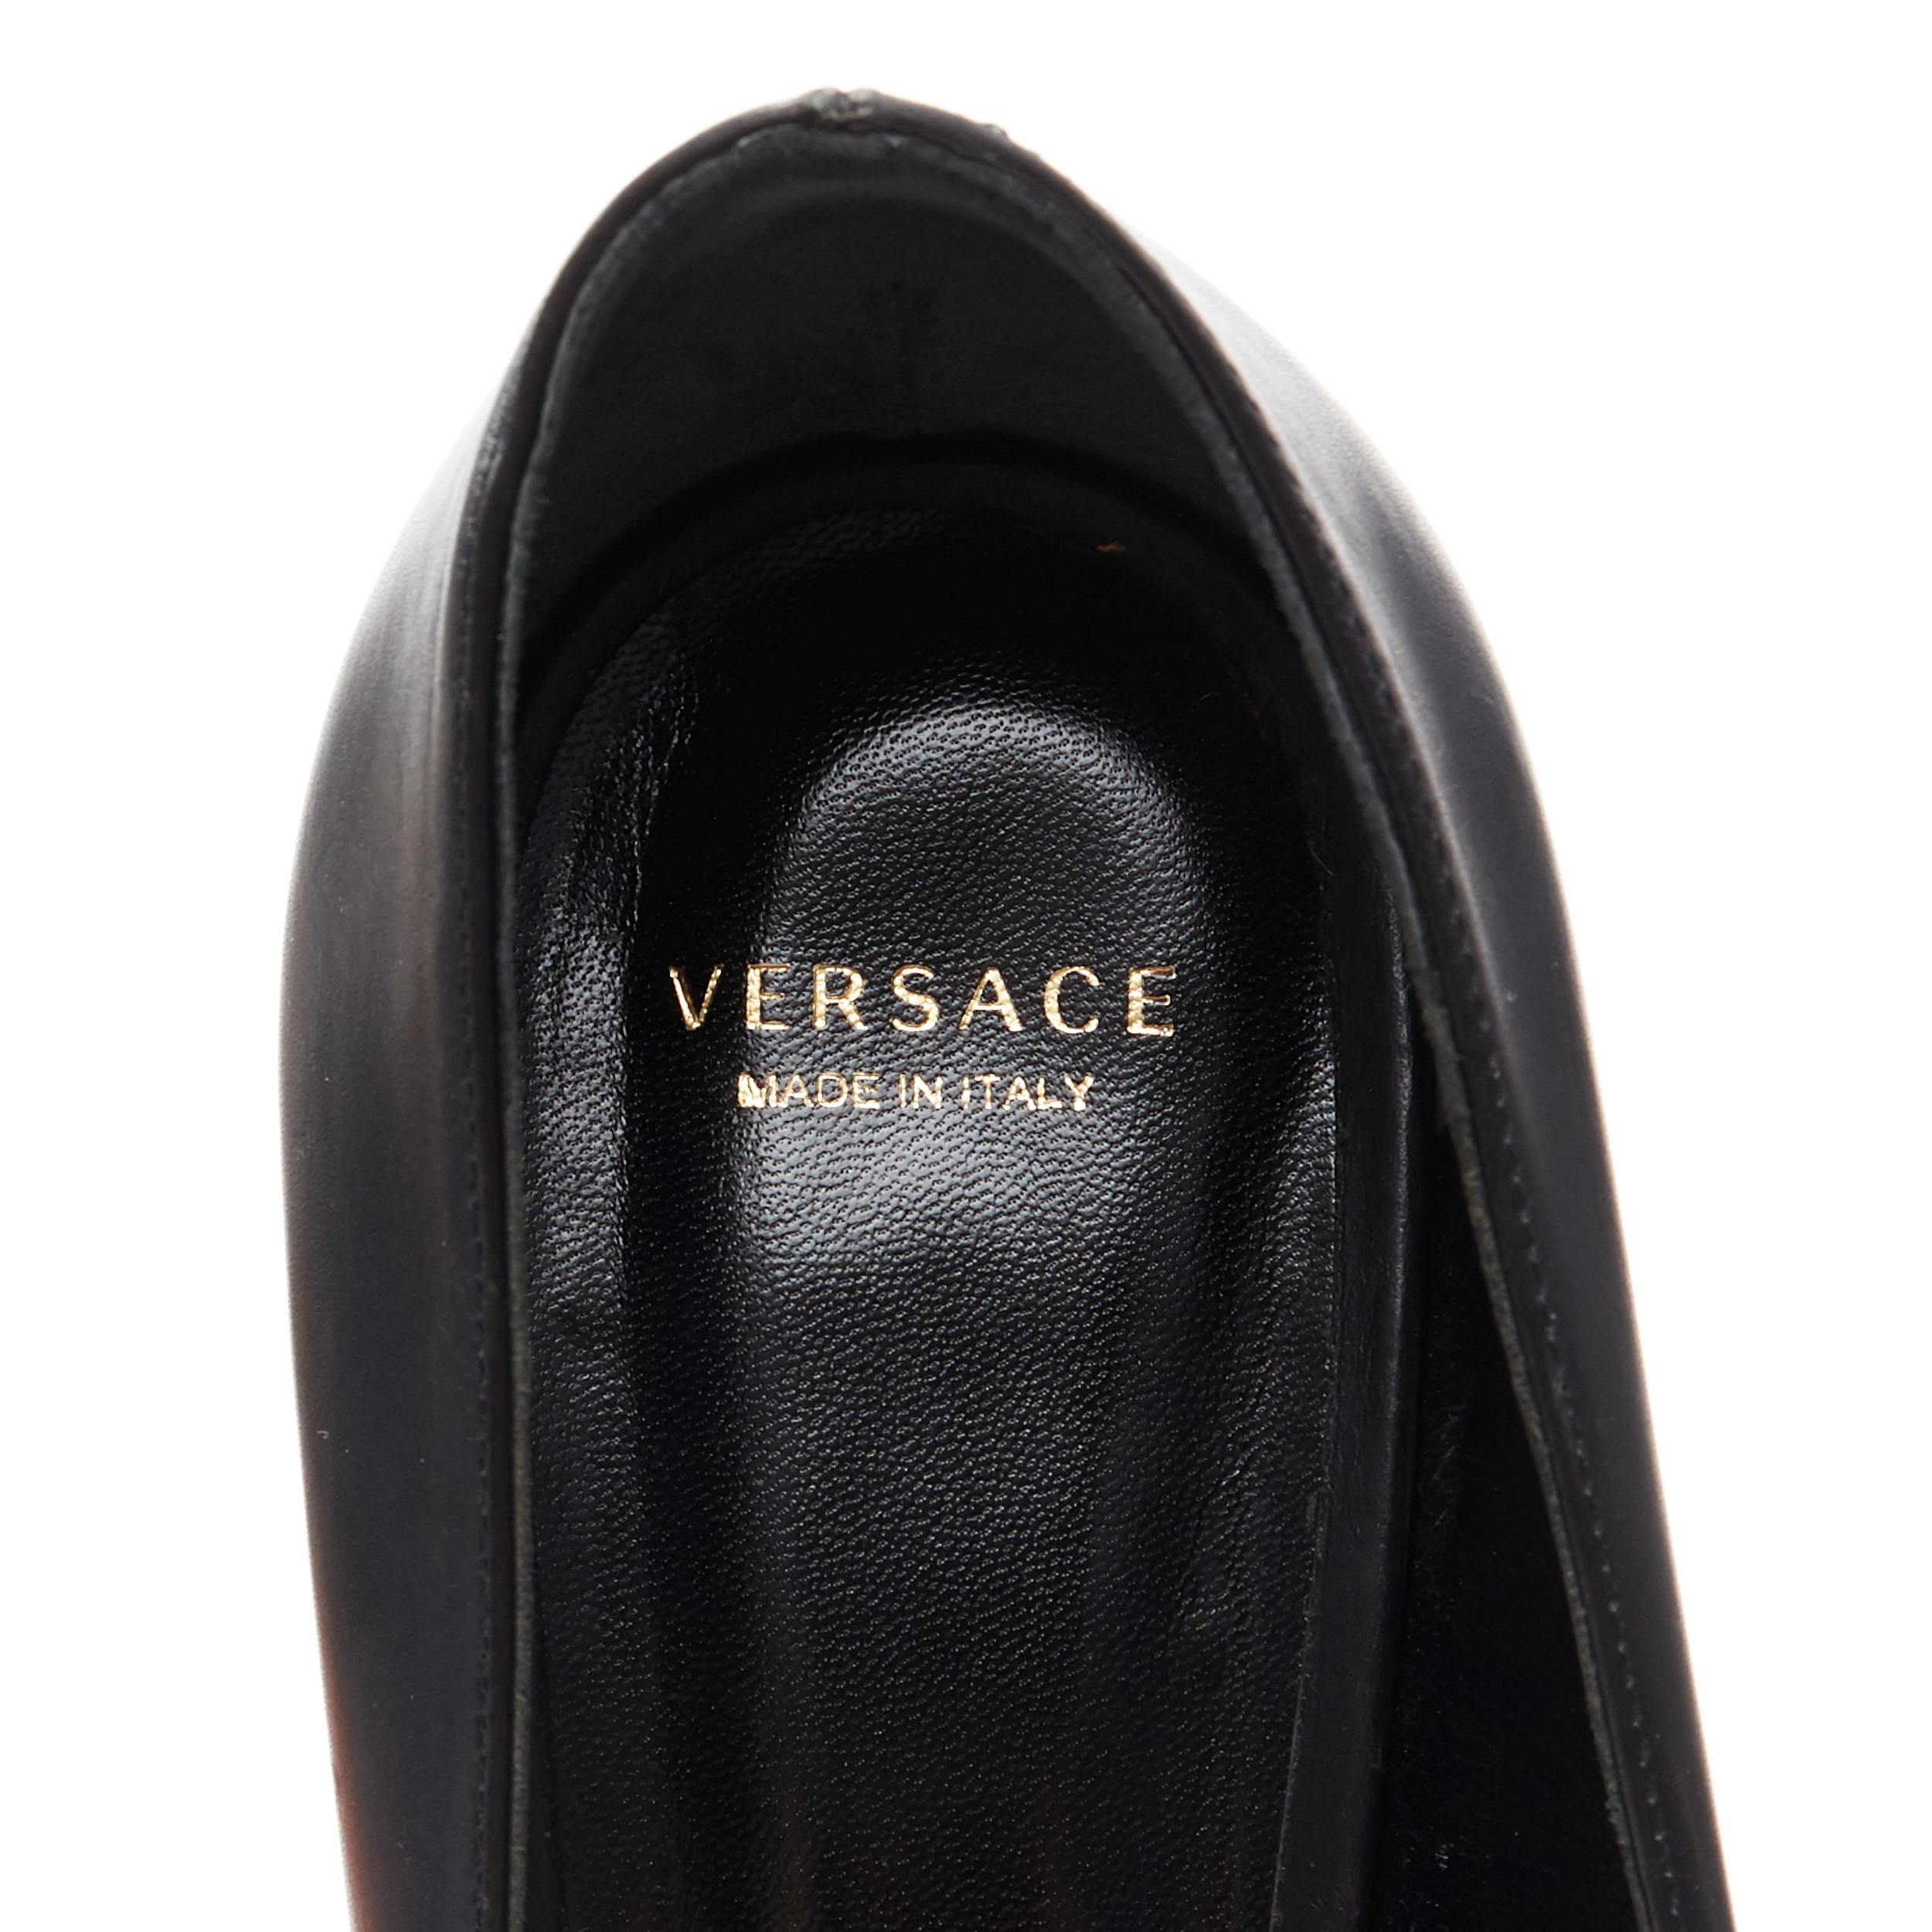 new VERSACE black calf leather champagne gold Medusa pointy pigalle pump EU39 5